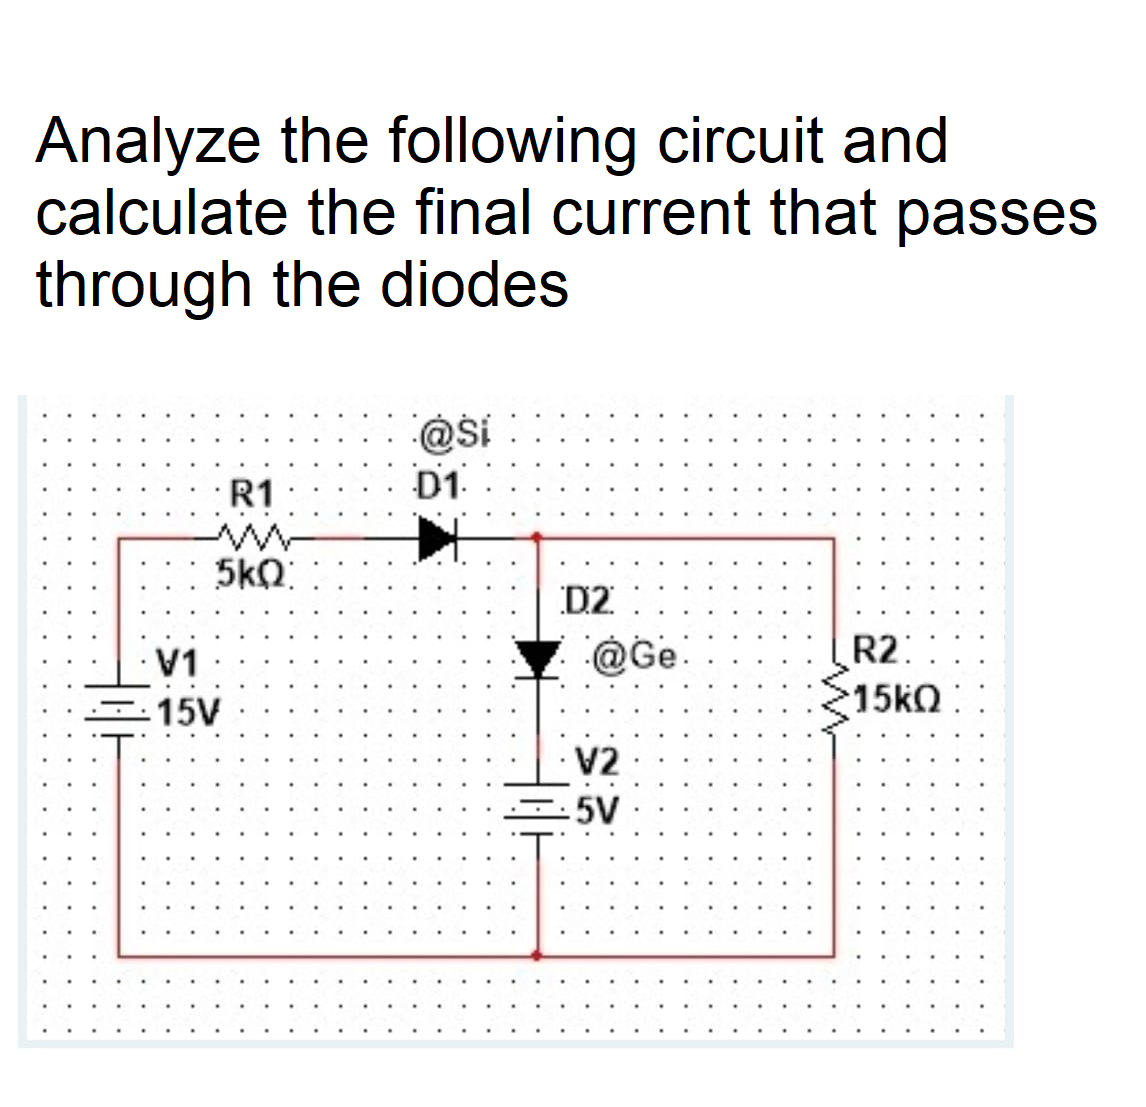 Analyze the following circuit and
calculate the final current that passes
through the diodes
R1
D1-
5kQ:
D2
R2:
15kQ:
V1
@Ge.
-15V
V2
-5V
